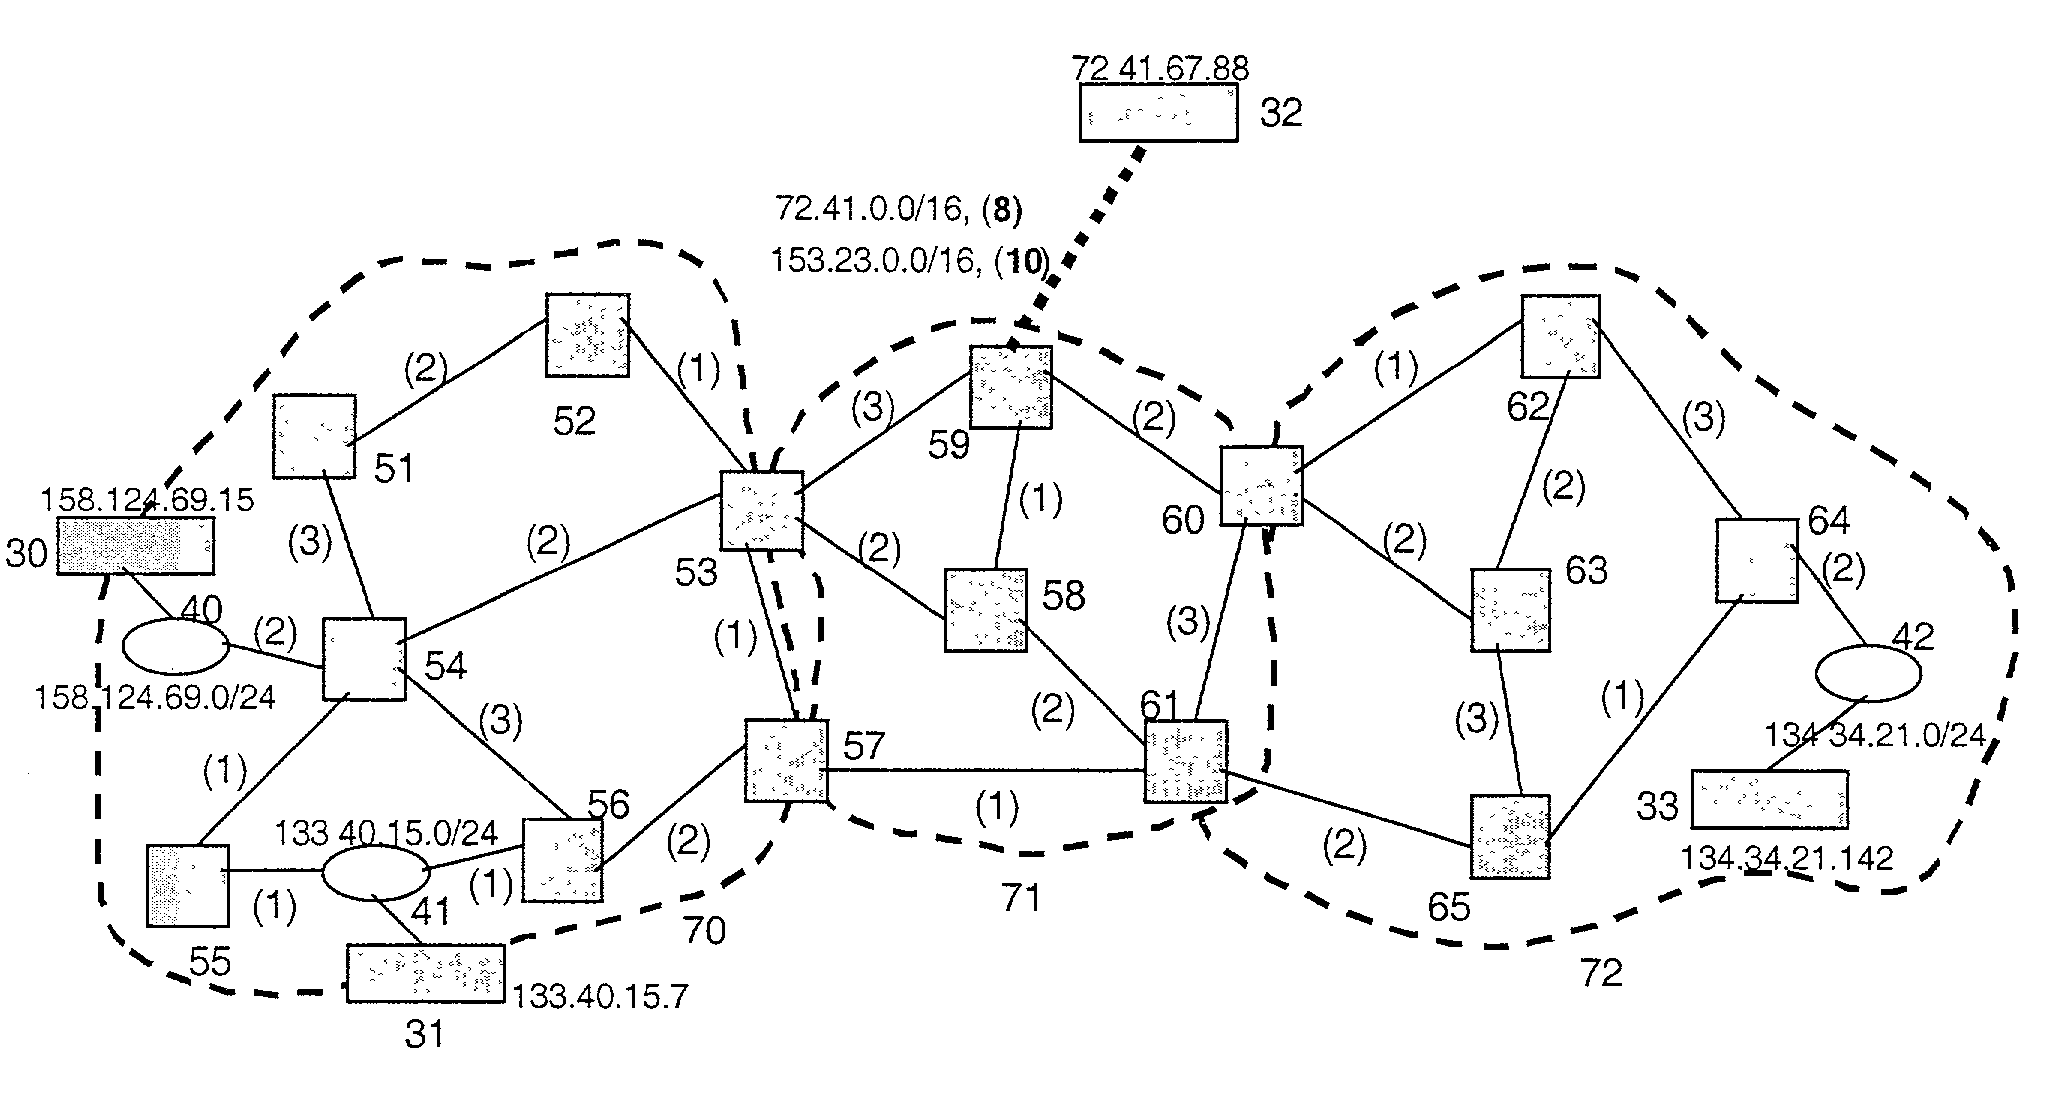 Method and system for topology construction and path identification in a two-level routing domain operated according to a simple link state routing protocol